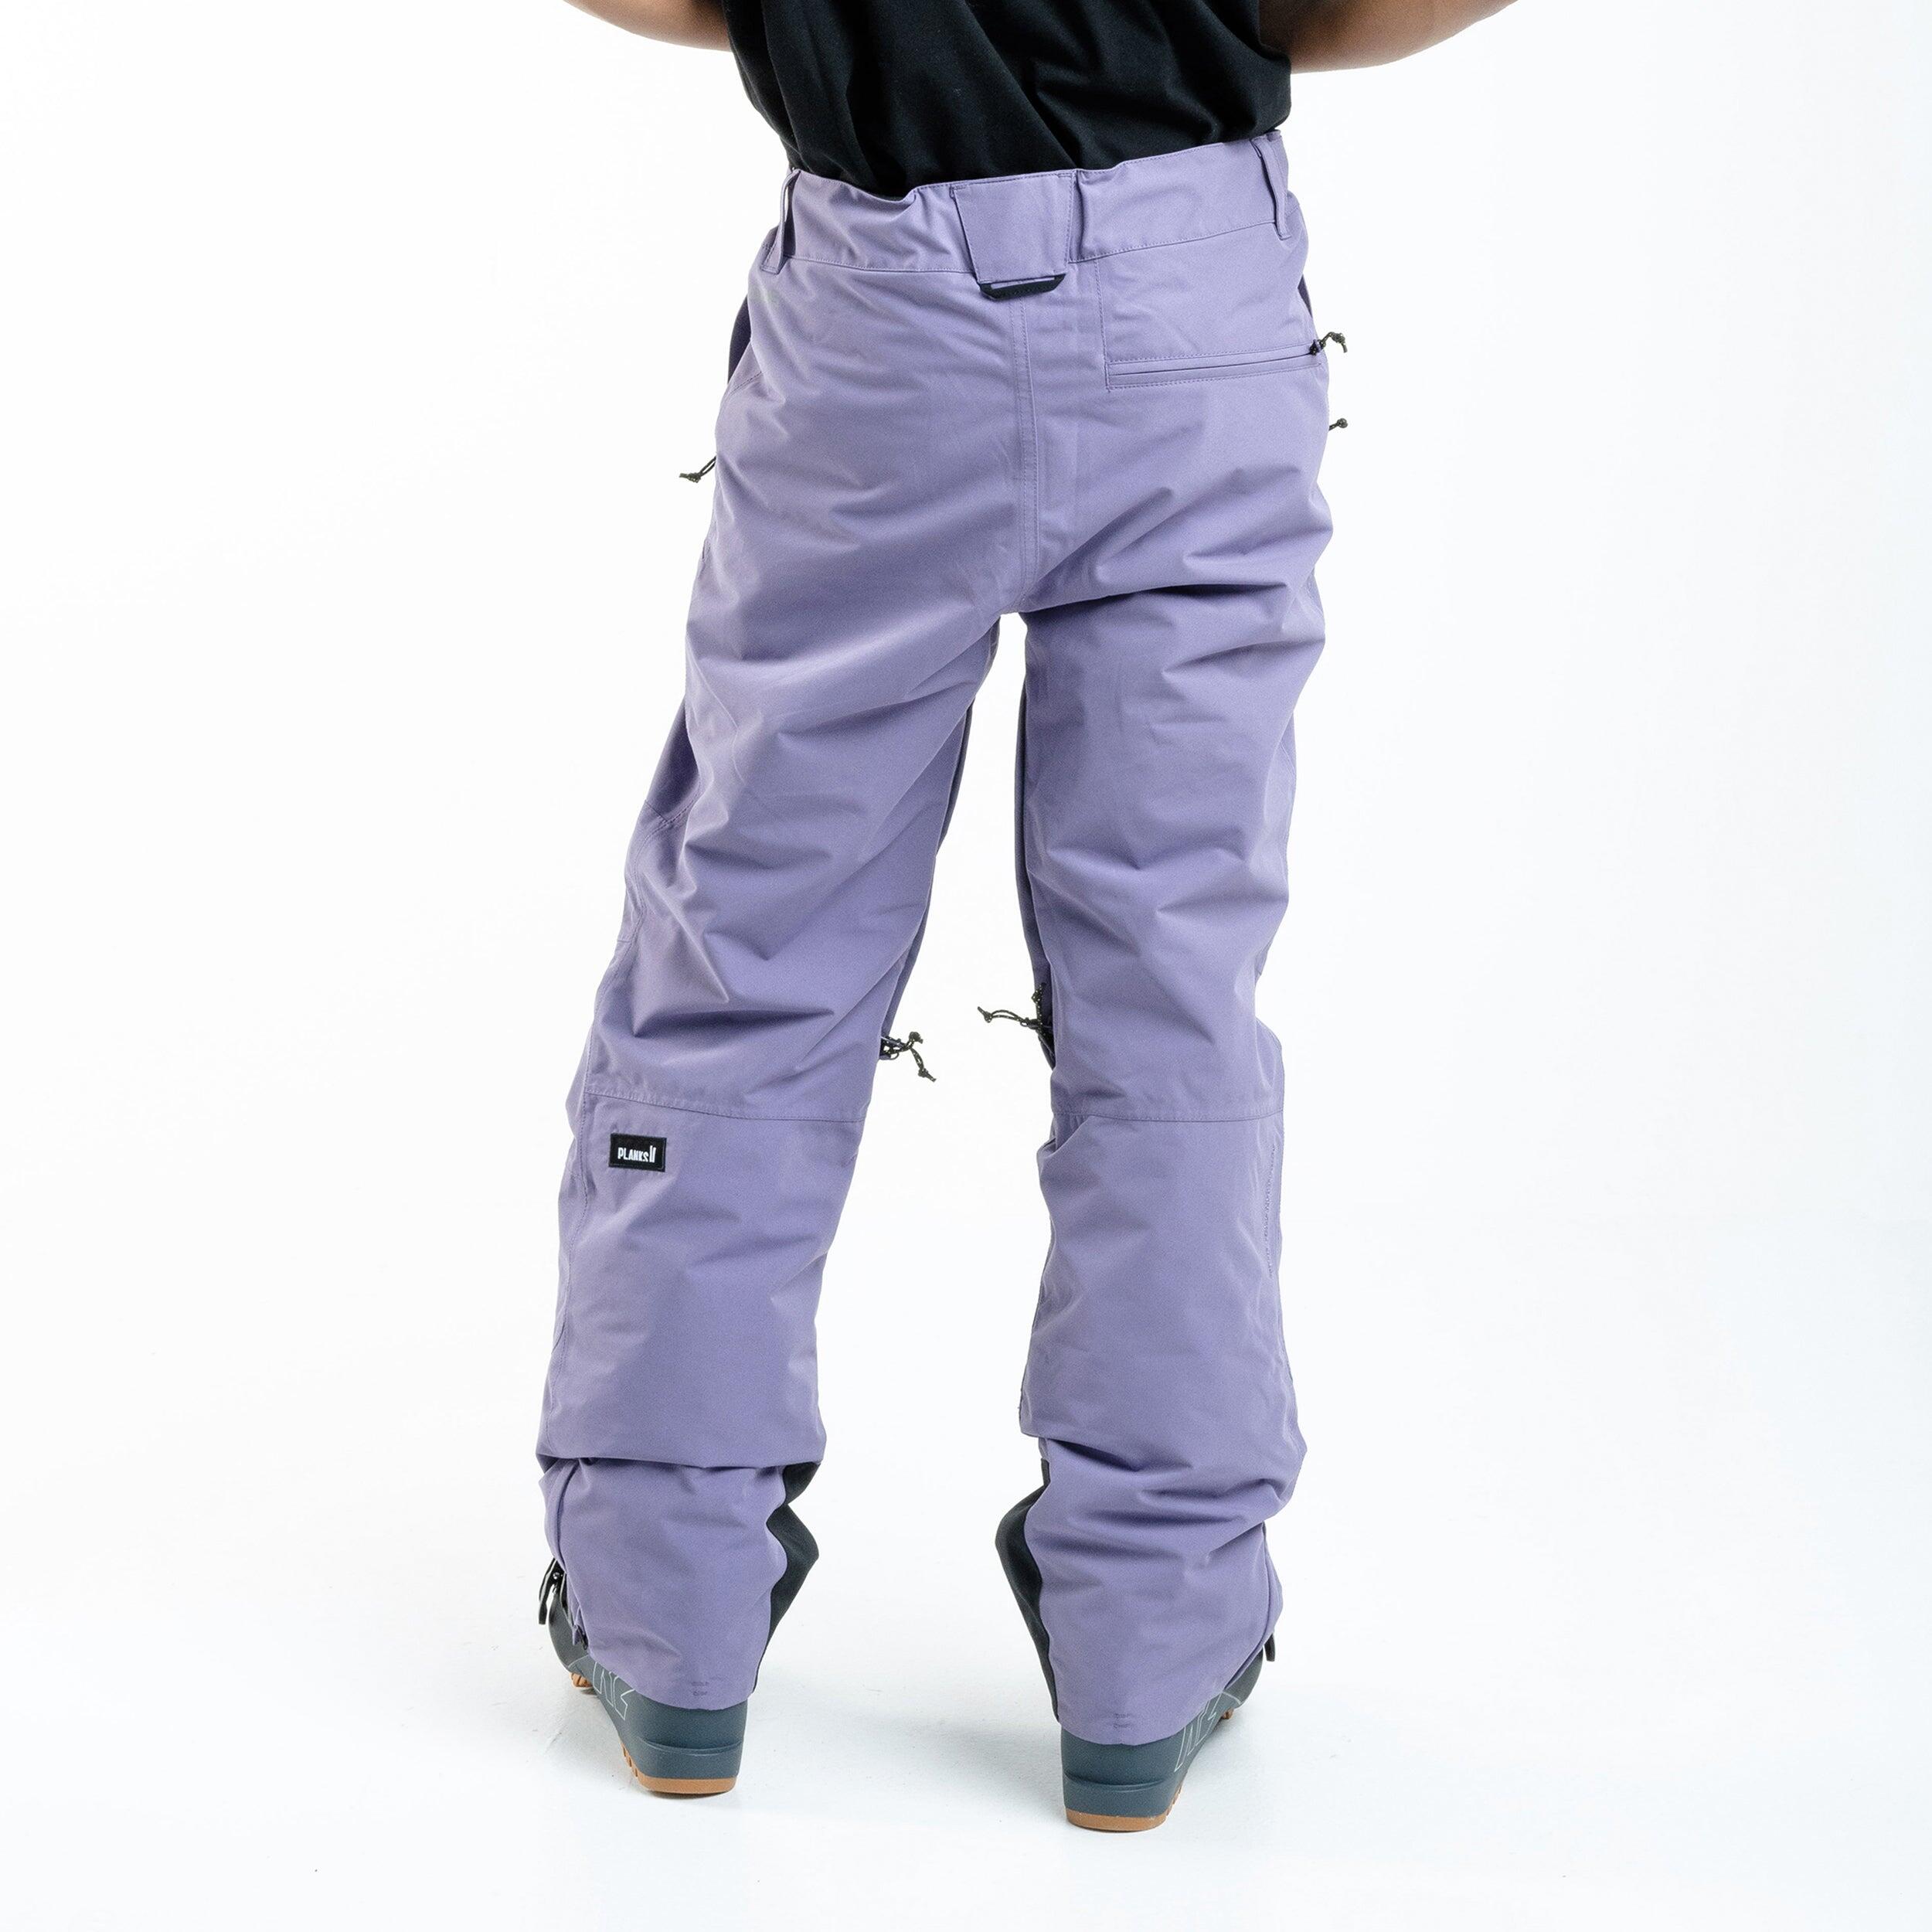 Planks Easy Rider Men's Ski Pants in Steep Purple with Pockets - Sports Trousers 4/4